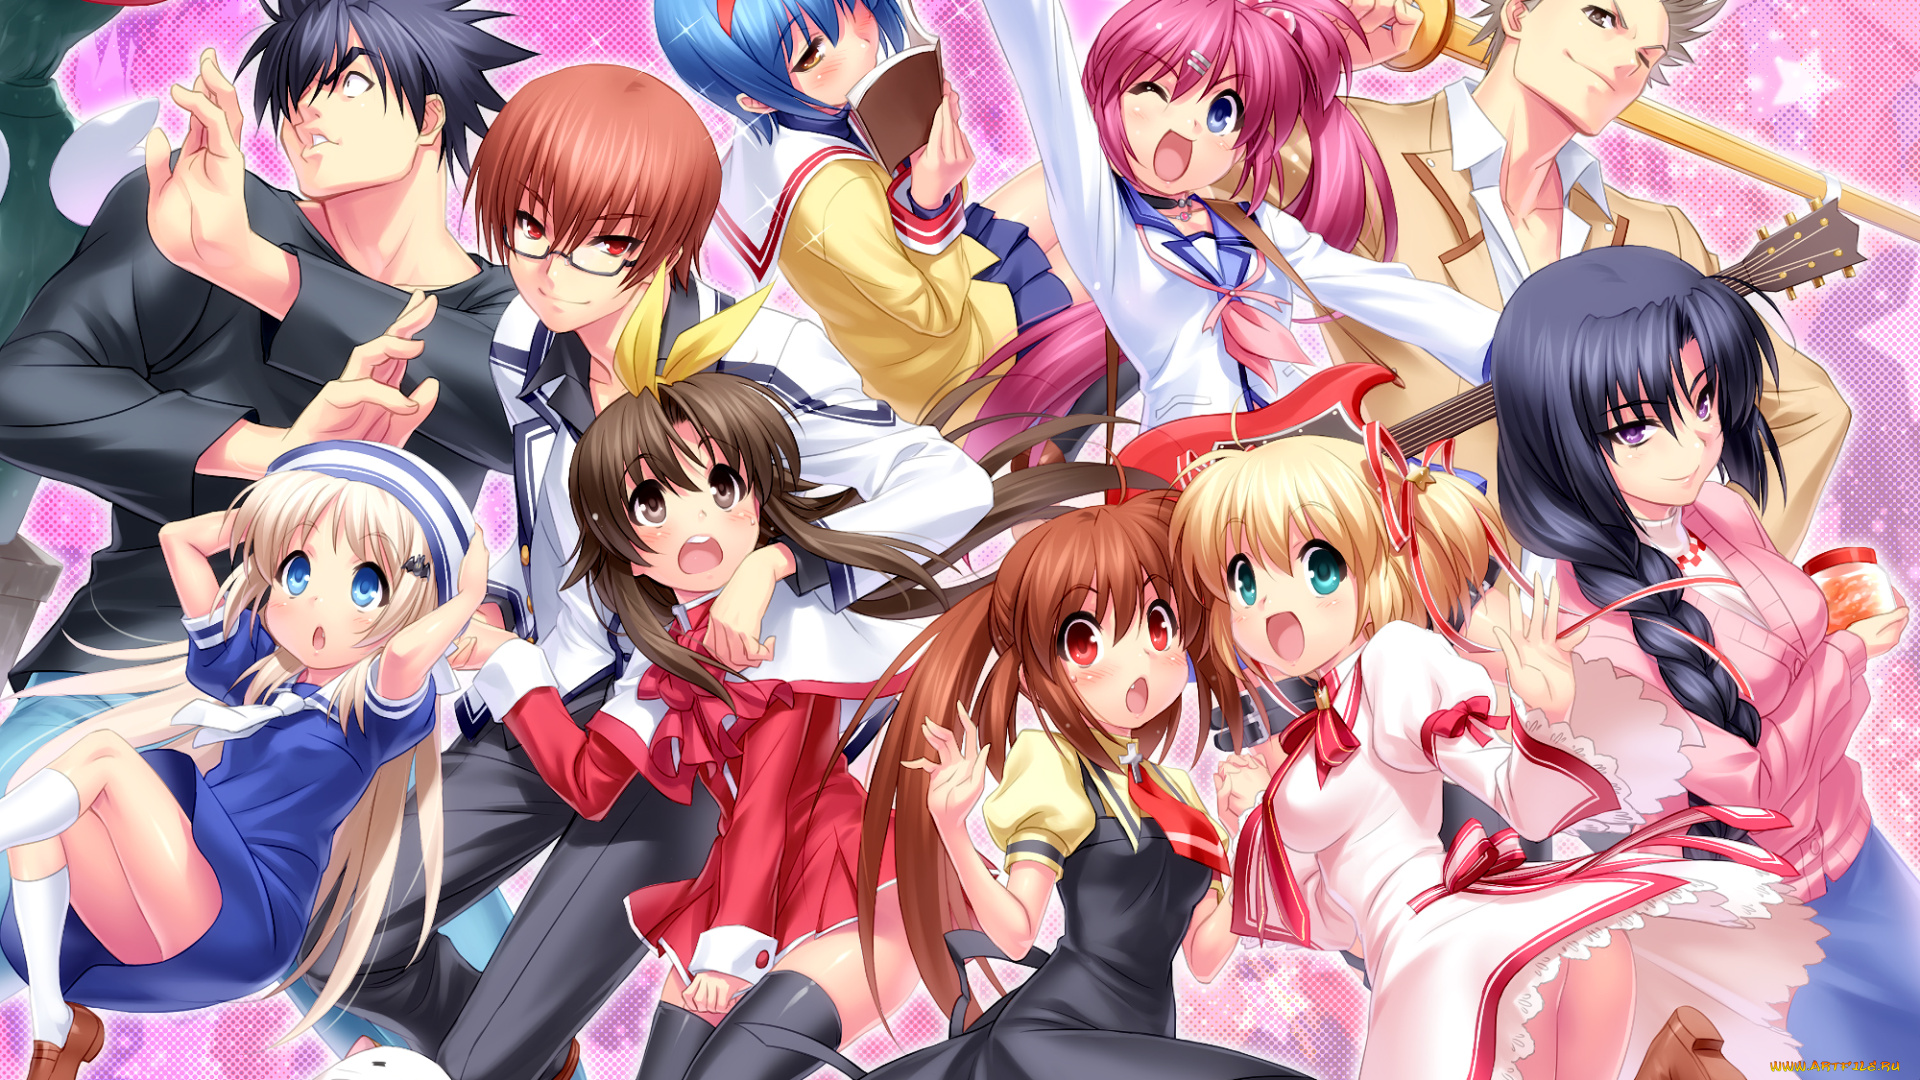 аниме, *unknown, , другое, rewrite, разное, арт, парни, девушки, little, busters, kanon, air, angel, beats, clannad